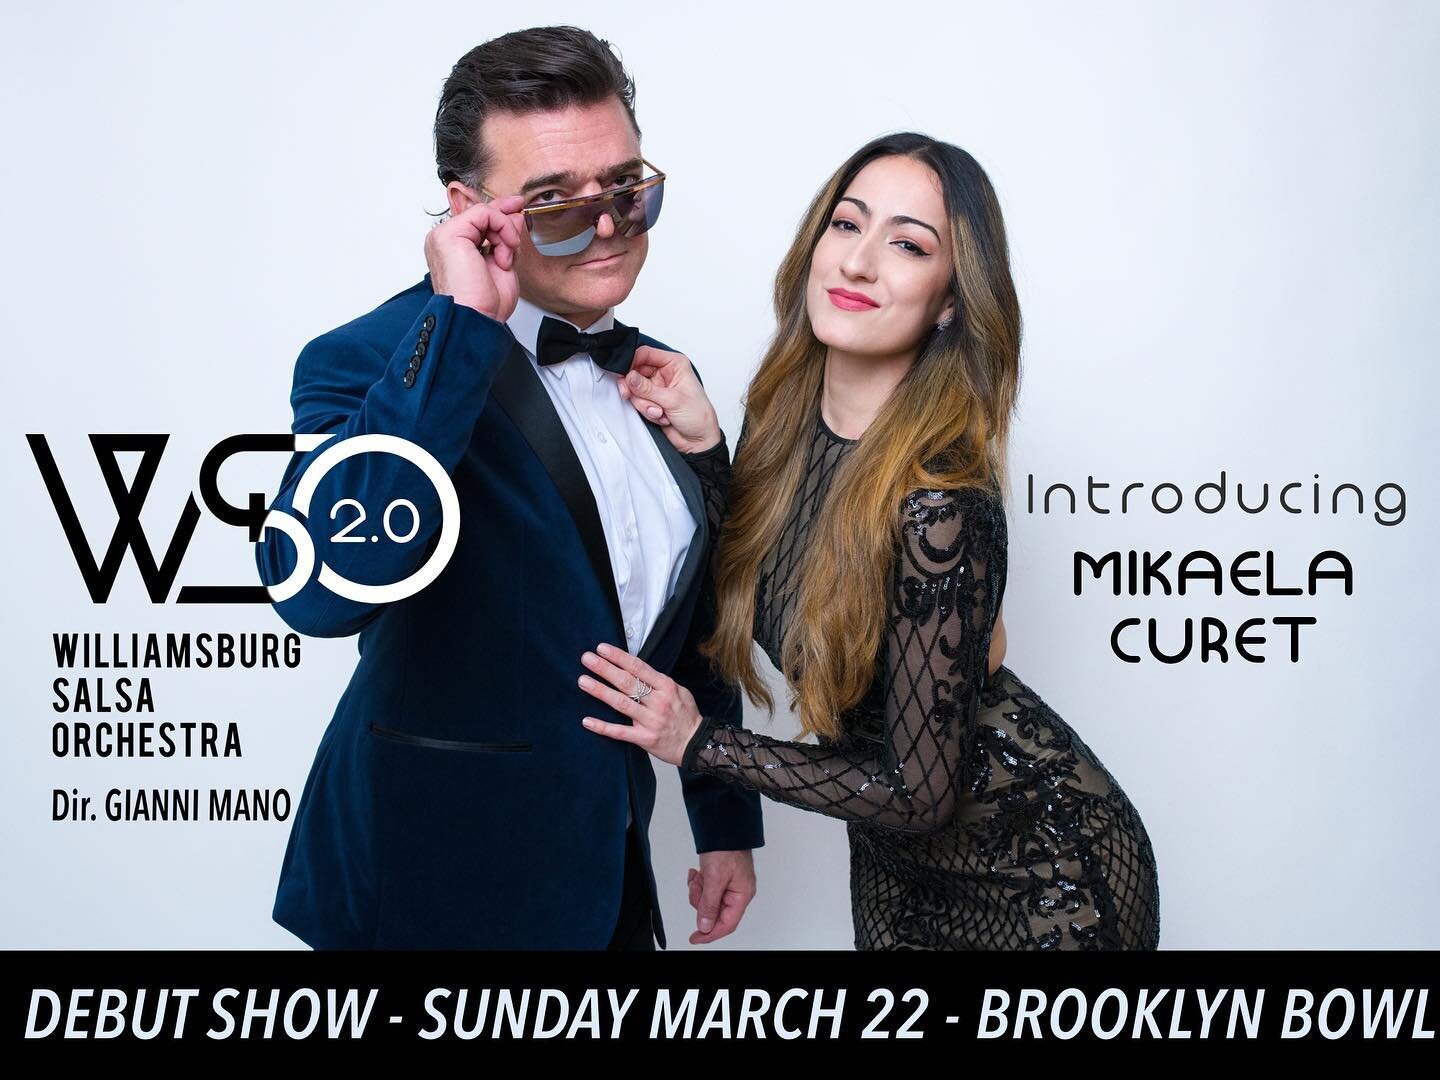 Introducing our new singer, from San Sebastian, Puerto Rico....Mikaela Curet! 
Debut show: Sun March 22 @brooklynbowl 
New Songs, New Look, Same Rhythms for your Feet!
@mikaelacuret @gianni_mano #salsadancing #salsa #nycsalsa #wso2.0